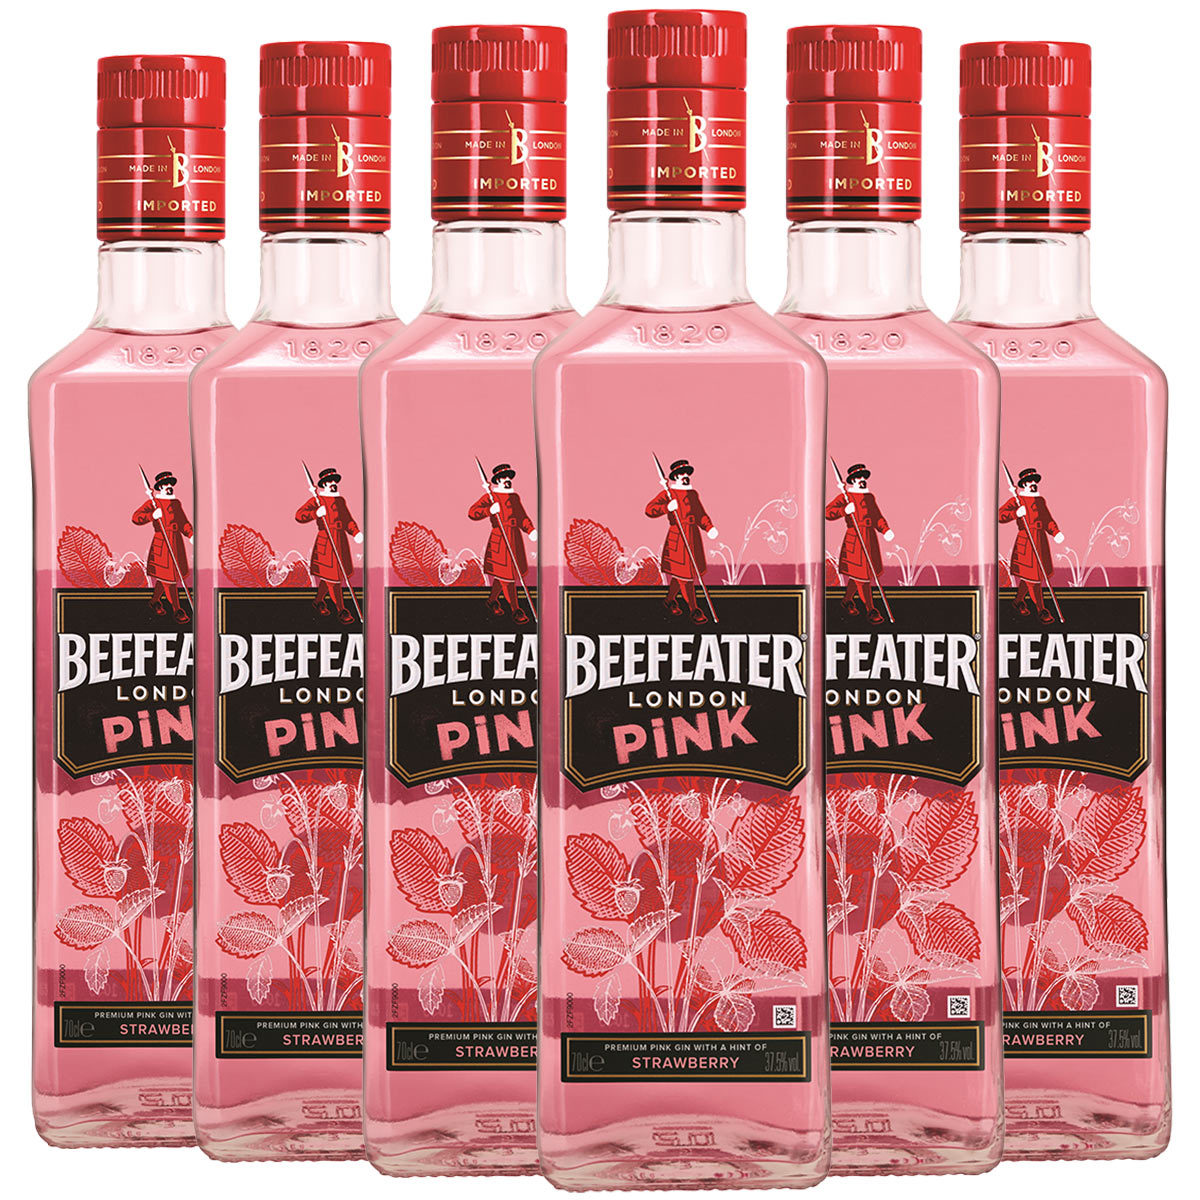 Beefeater London Pink Strawberry Gin, 6 x 70cl